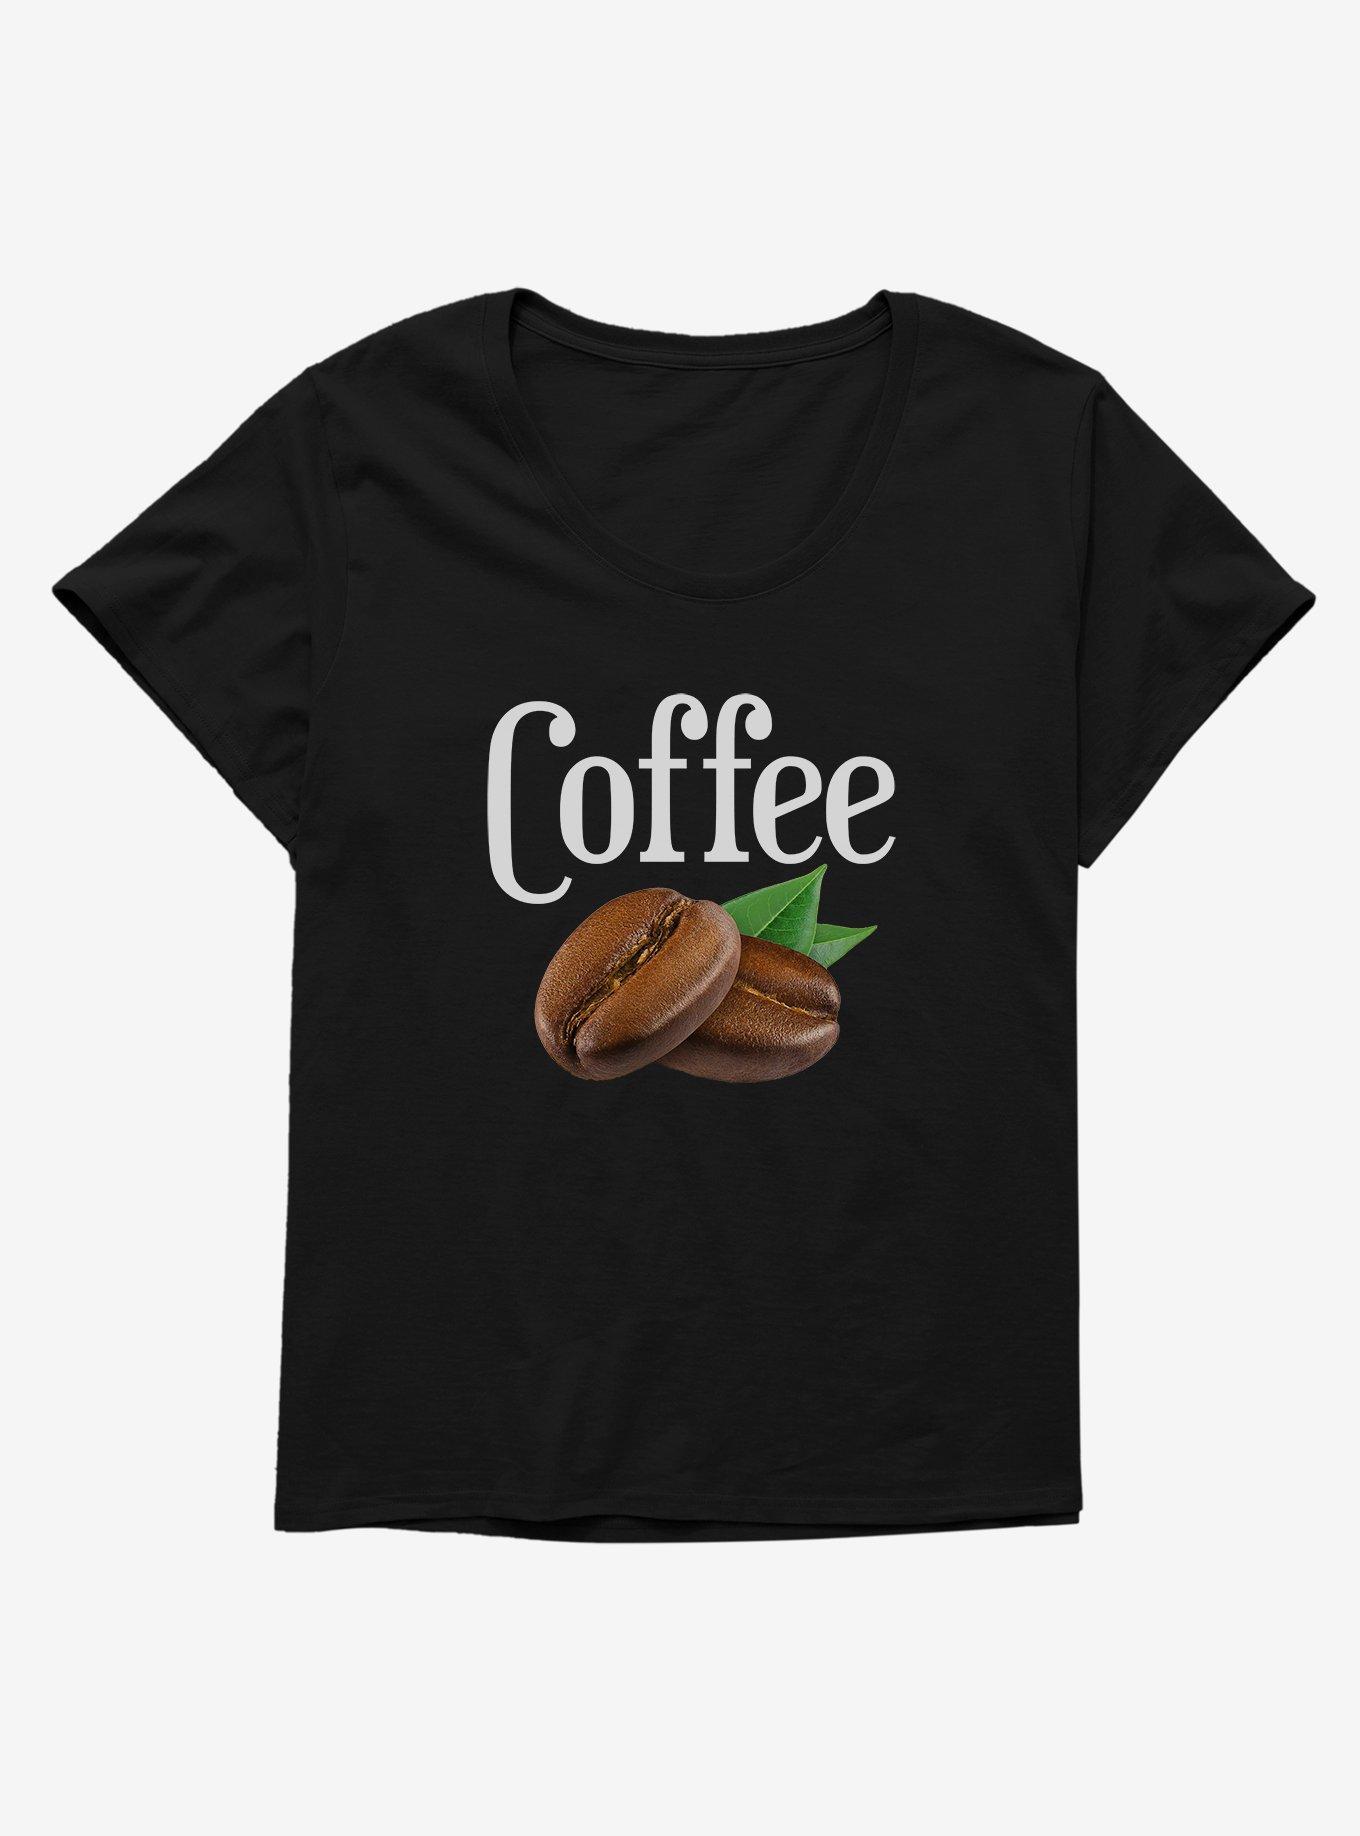 Hot Topic Coffee Girls T-Shirt Plus Size, , hi-res